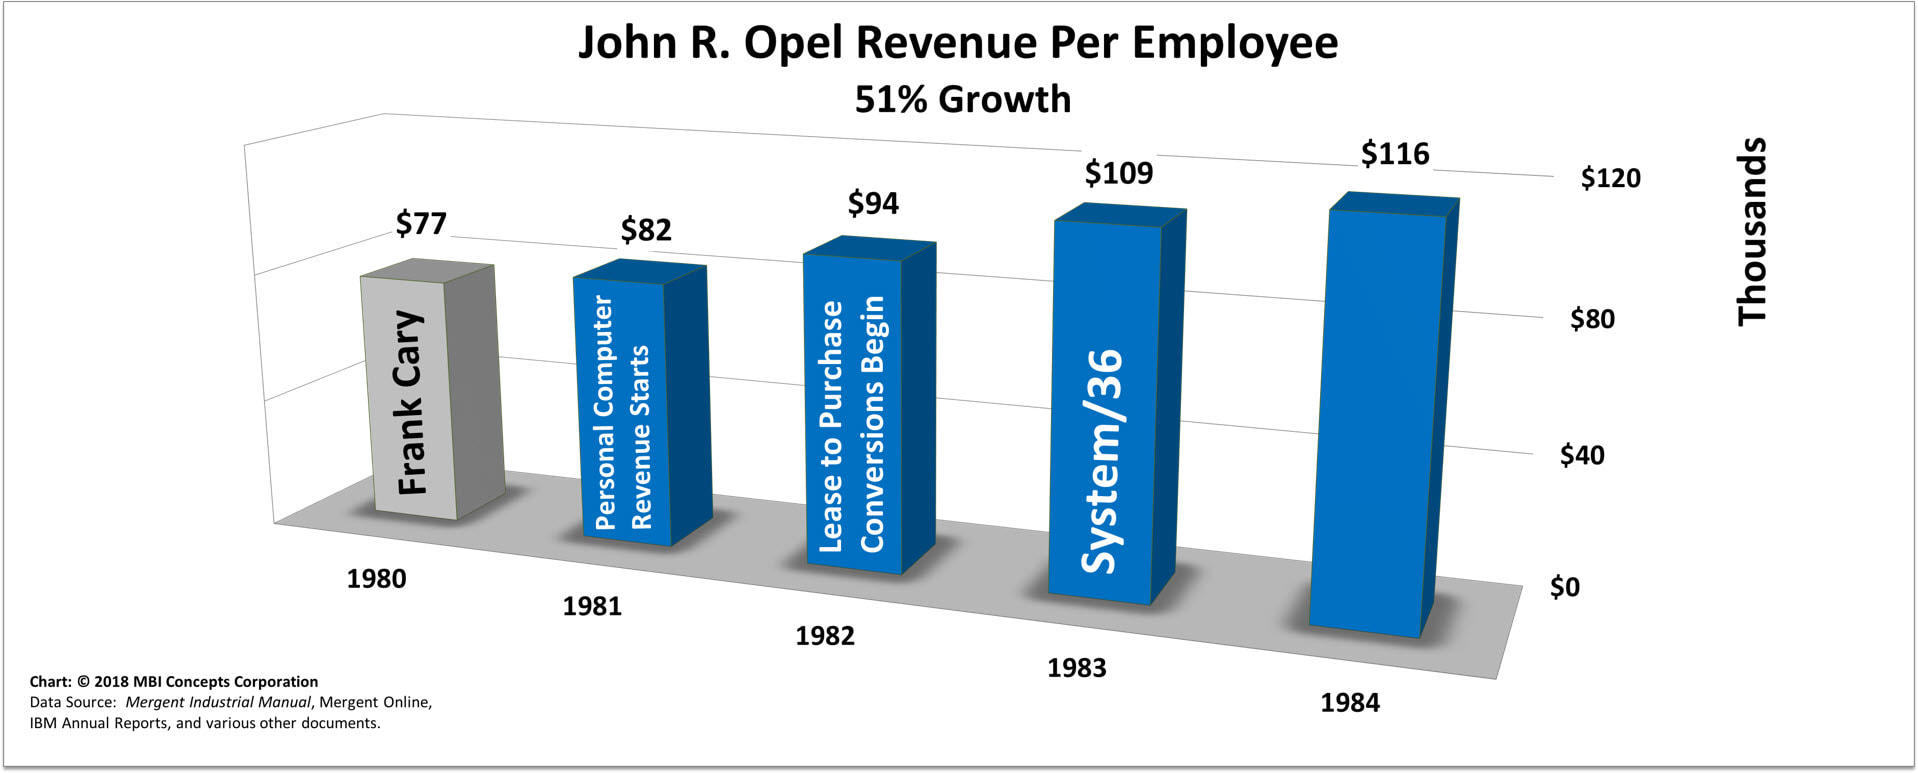 A color bar chart showing IBM's yearly revenue revenue per employee (sales productivity) from 1980 through 1984 for John R. Opel.